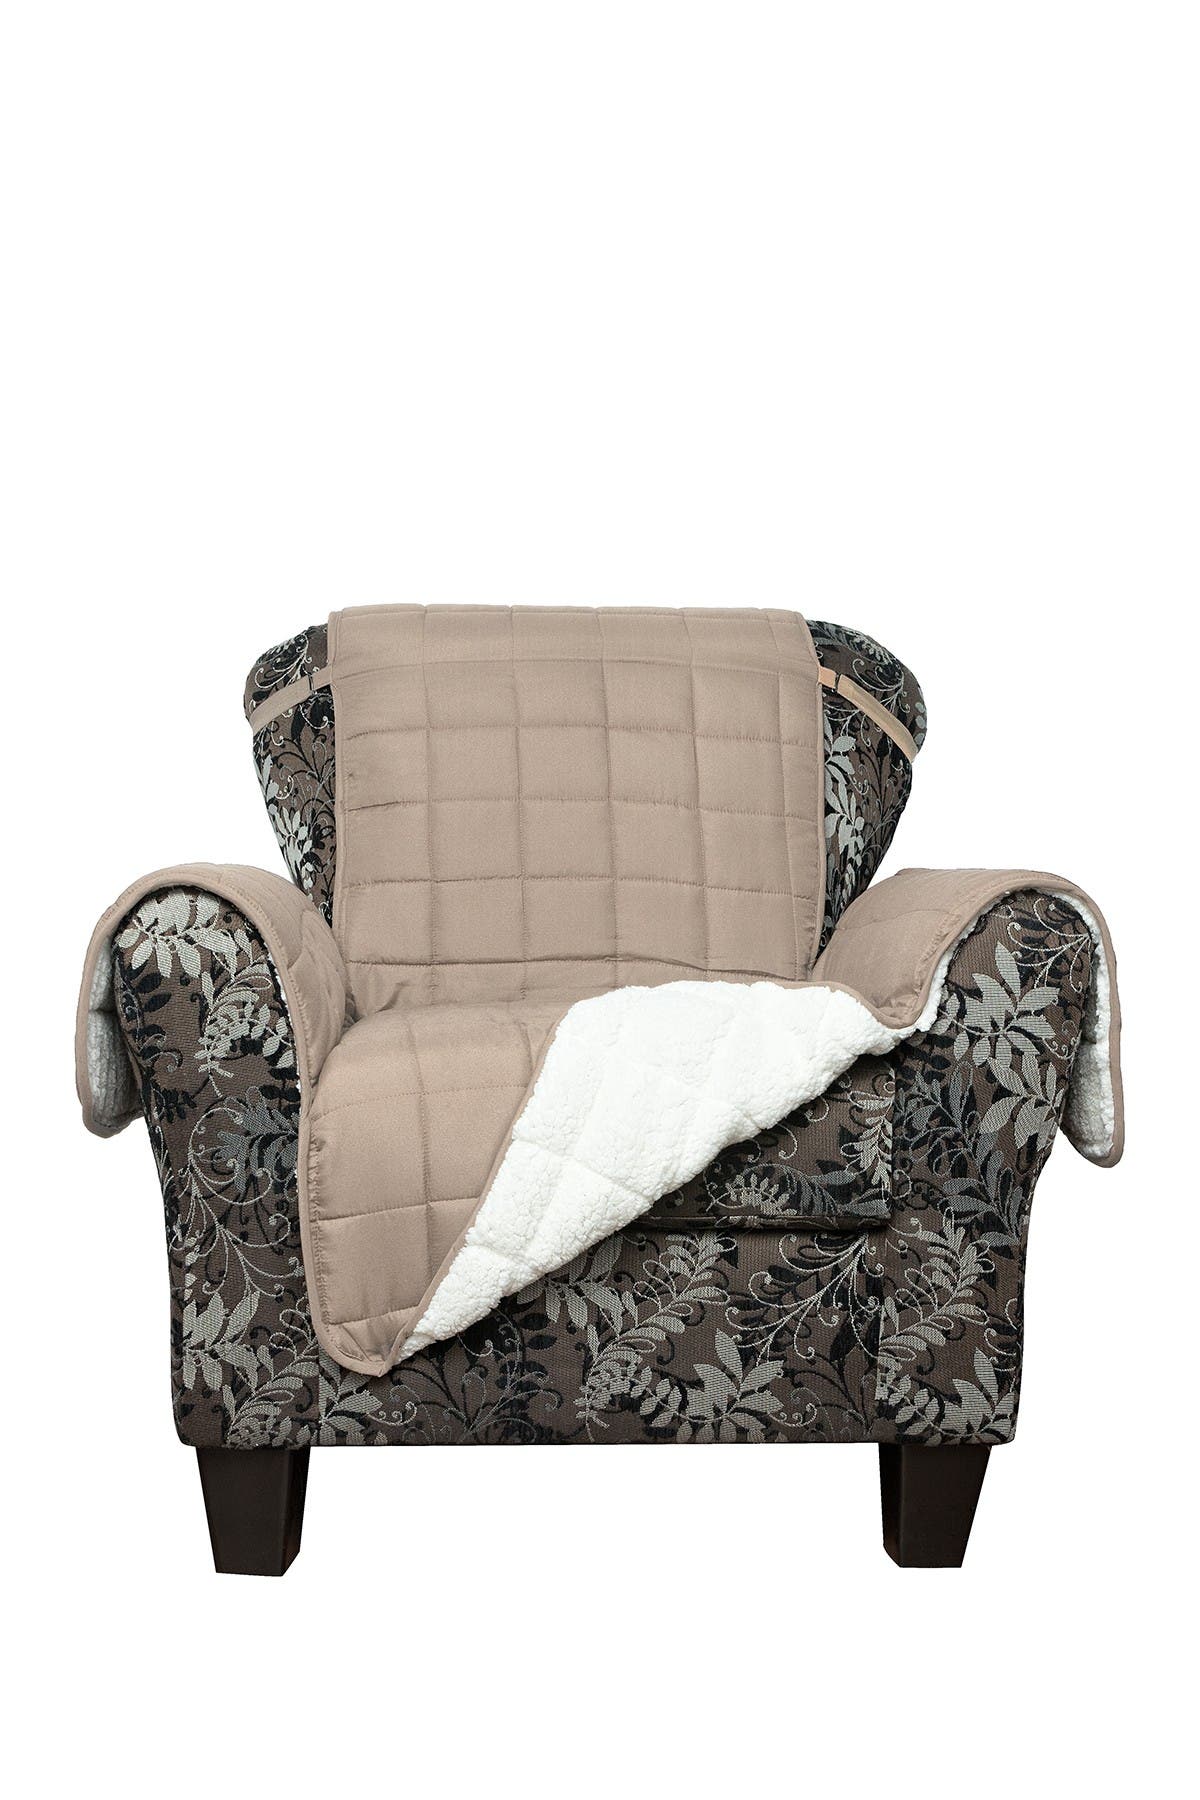 Duck River Textile Taupe Jeremy Faux Shearling Reversible Waterproof Microfiber Chair Cover In Grey